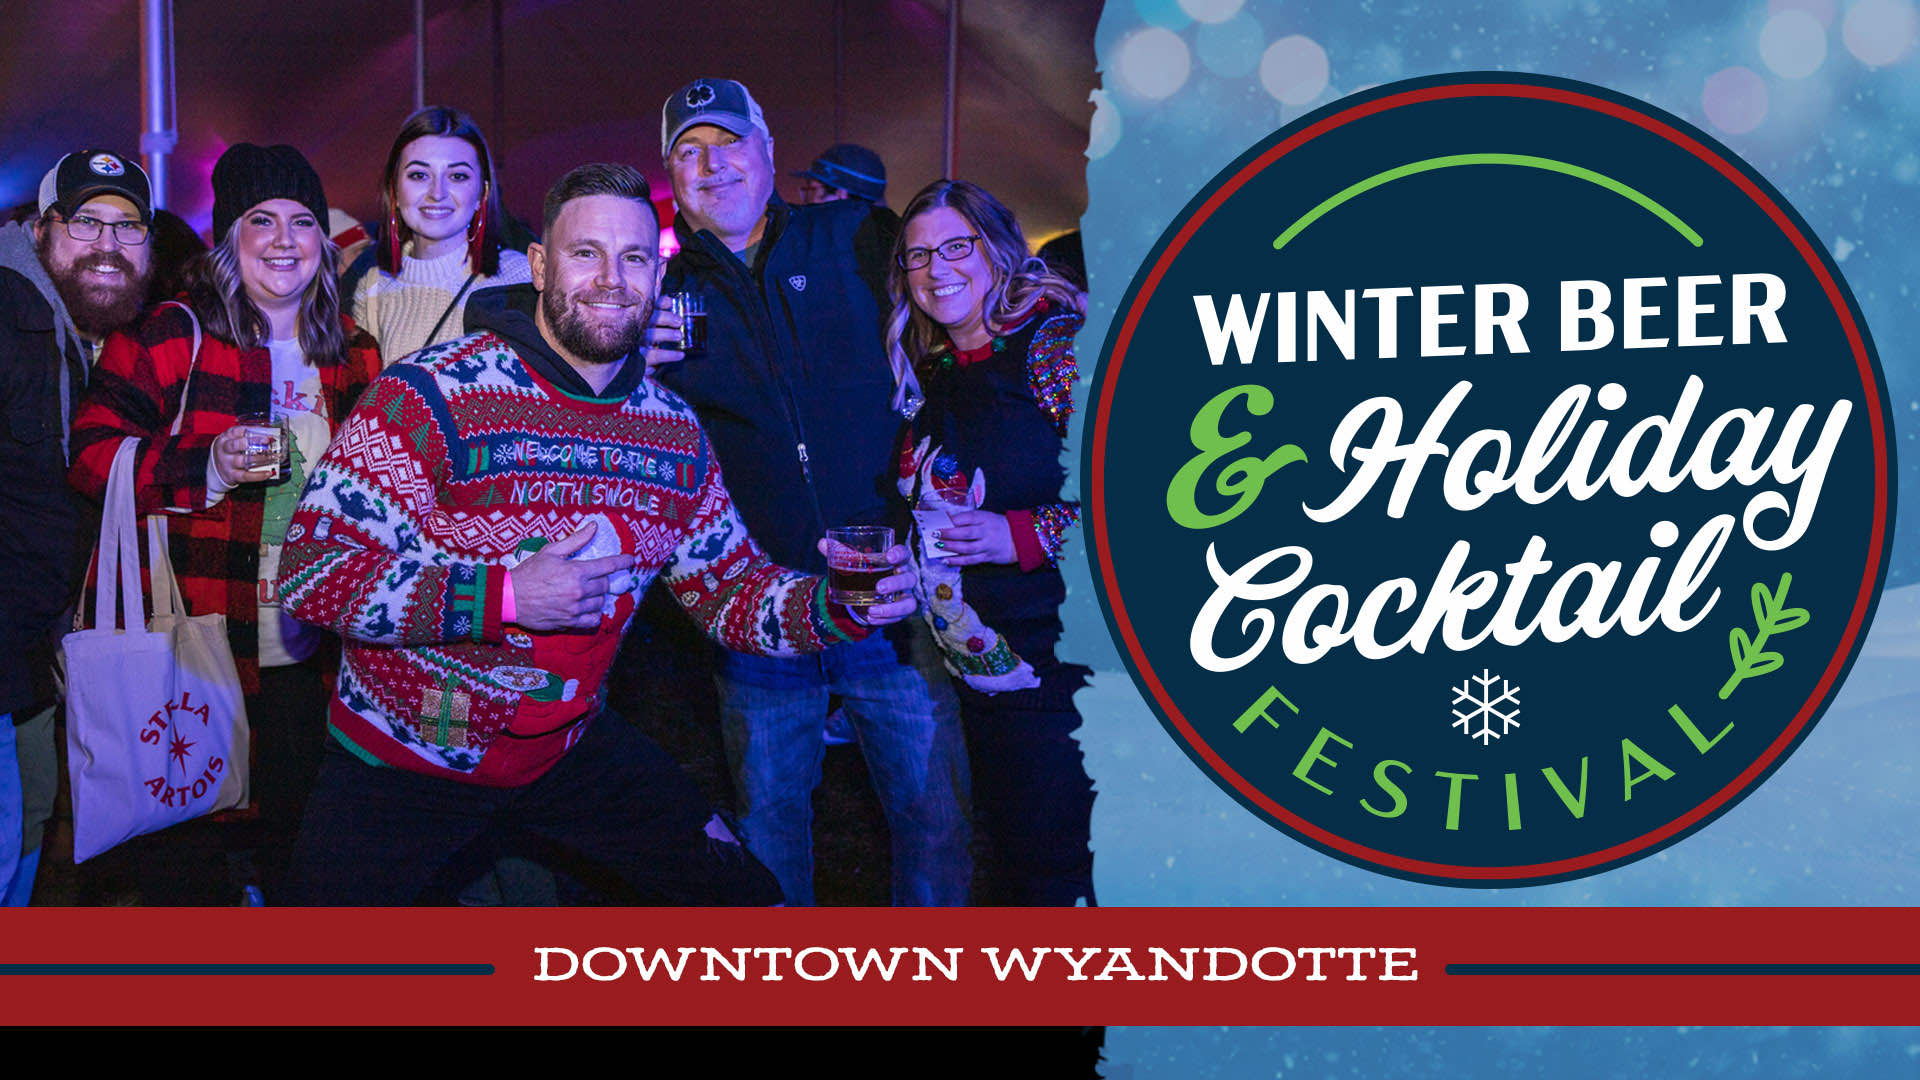 Winter Beer & Holiday Cocktail Festival in Downtown Wyandotte. Event logo overlaying image of group of party goers with christmas sweaters